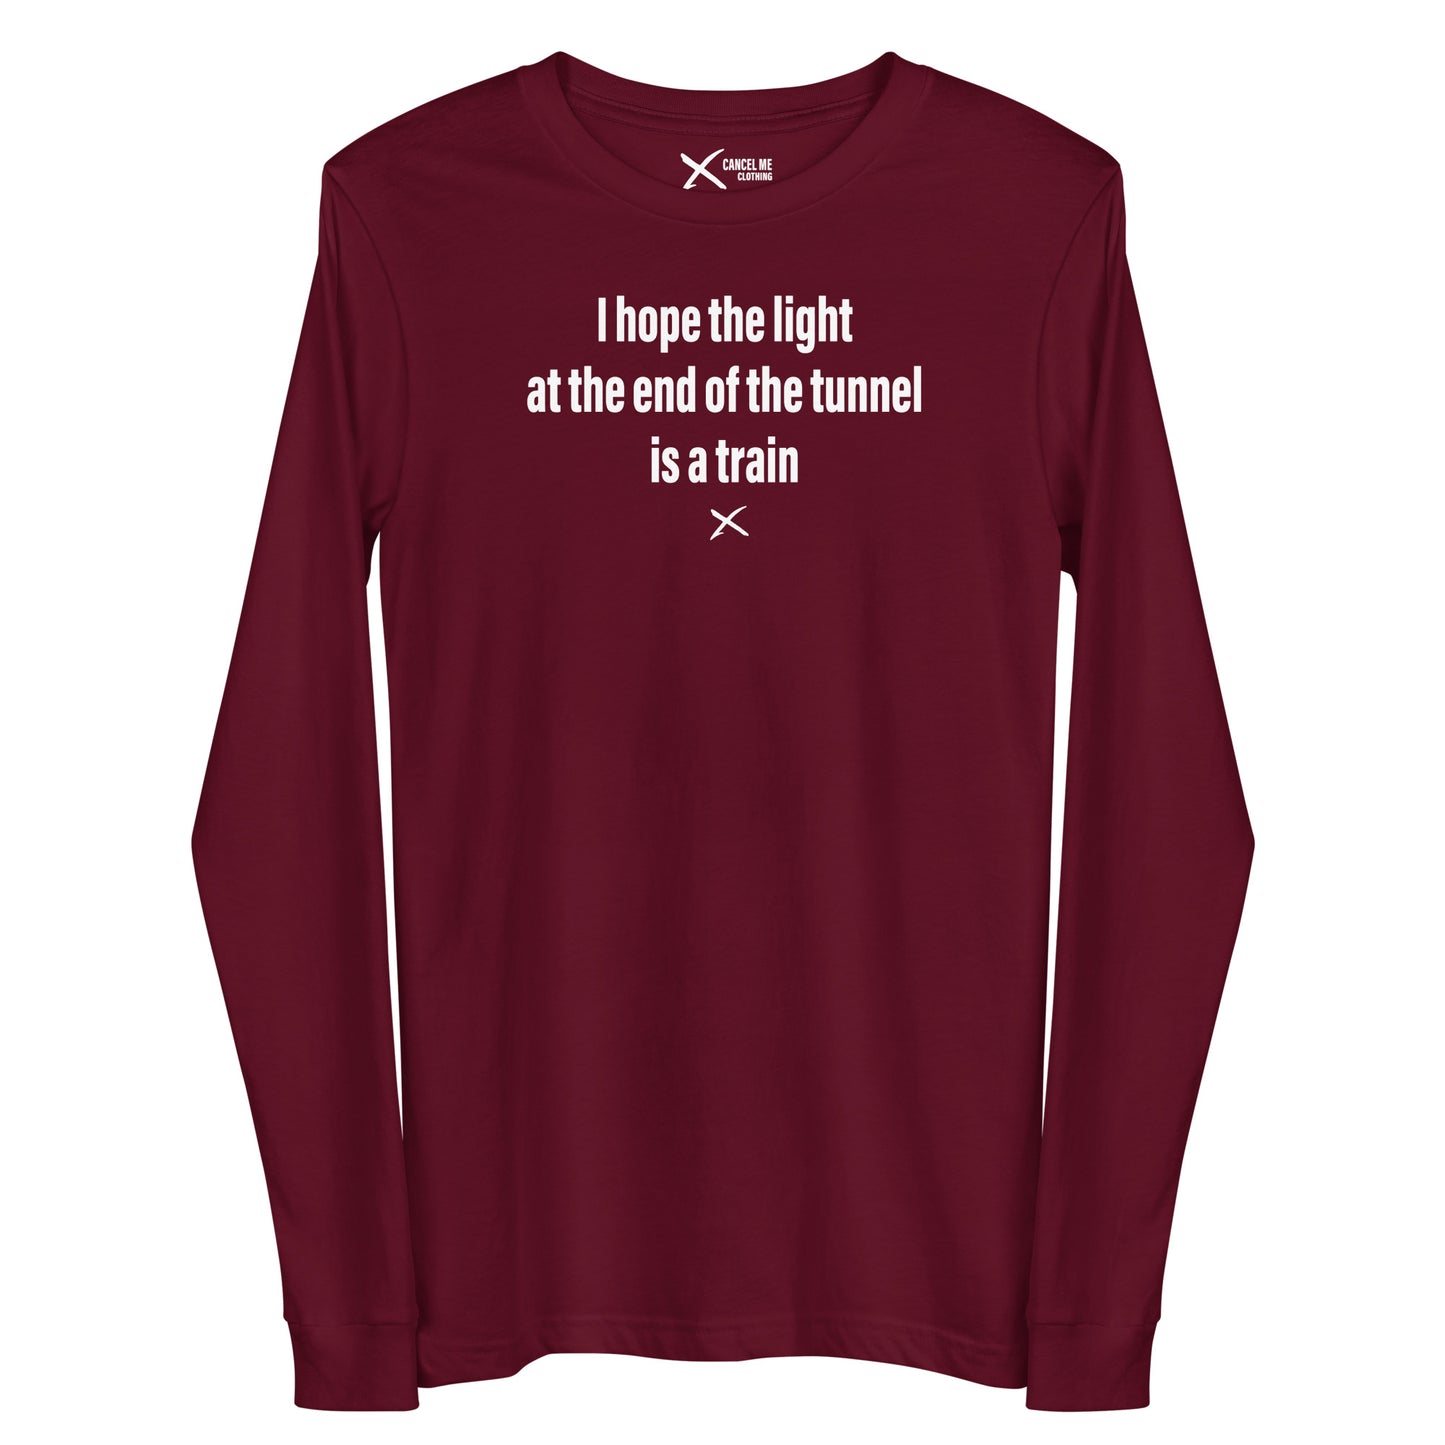 I hope the light at the end of the tunnel is a train - Longsleeve